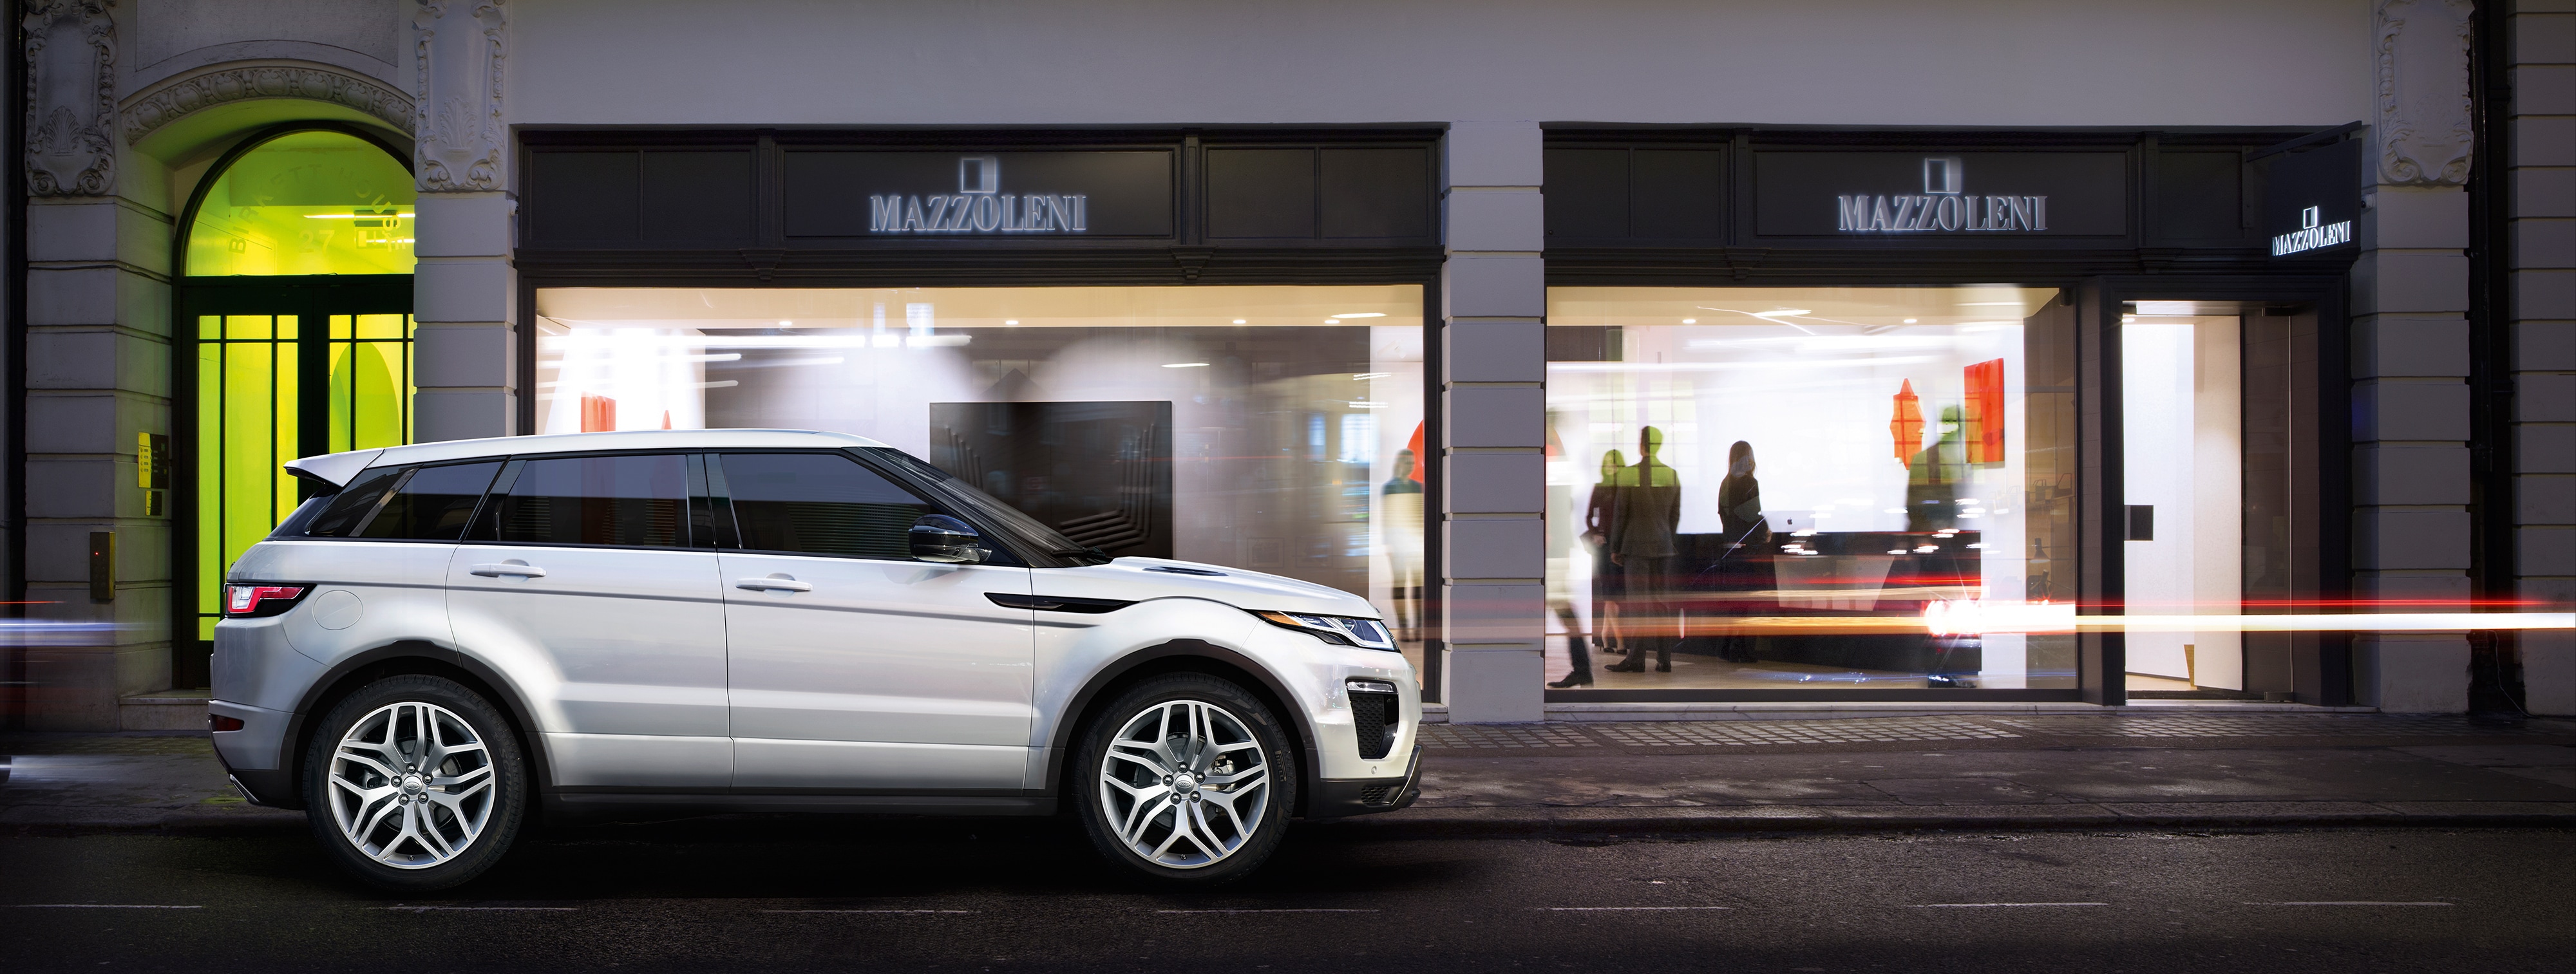 New Range Rover Evoque for sale in Bedford, NH